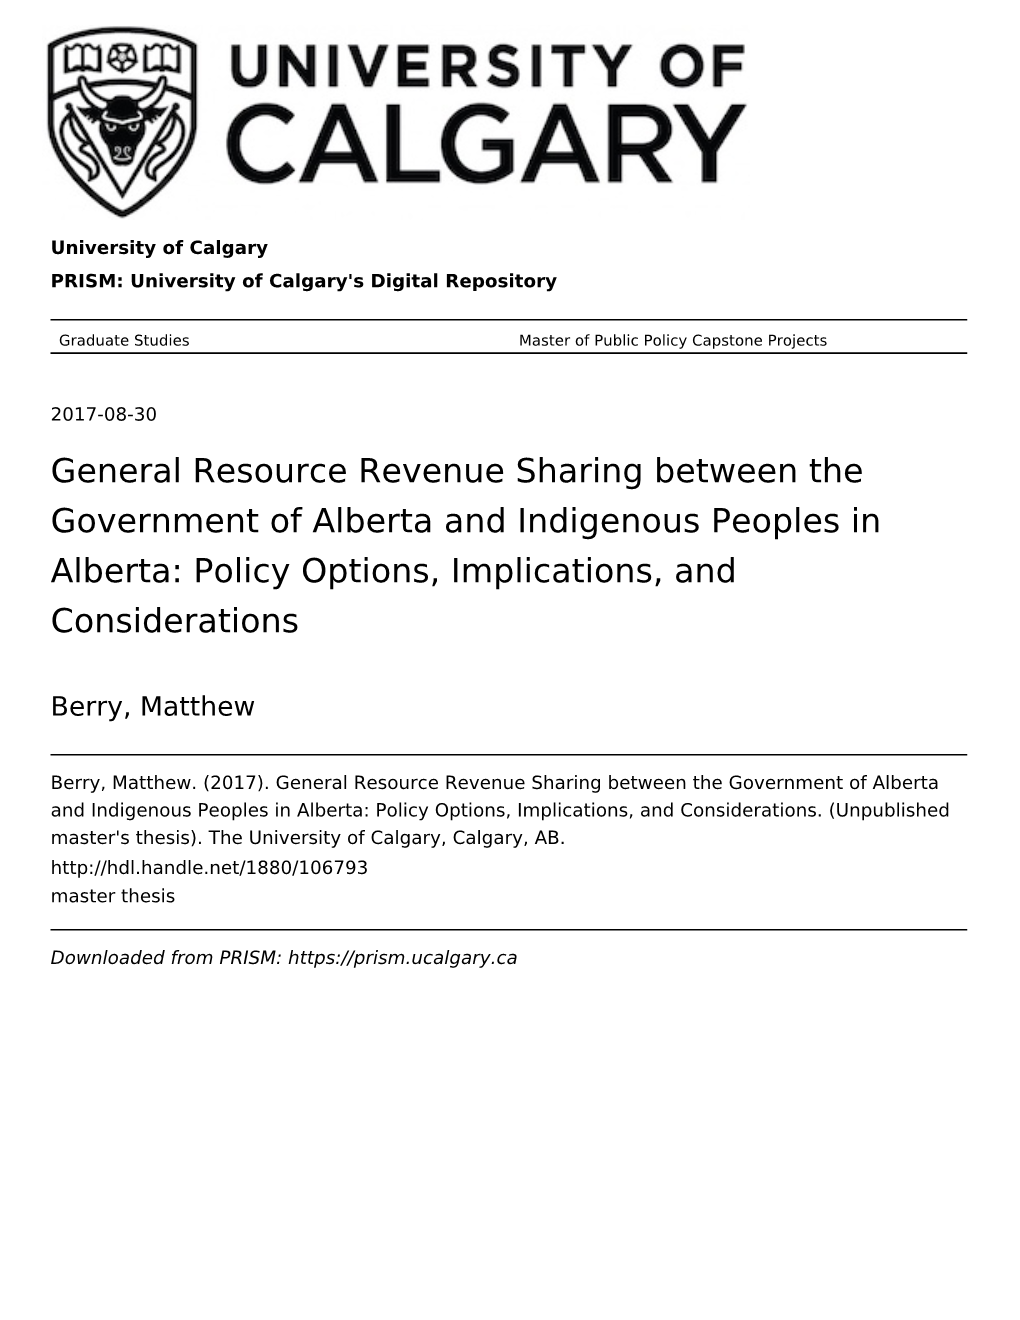 General Resource Revenue Sharing Between the Government of Alberta and Indigenous Peoples in Alberta: Policy Options, Implications, and Considerations